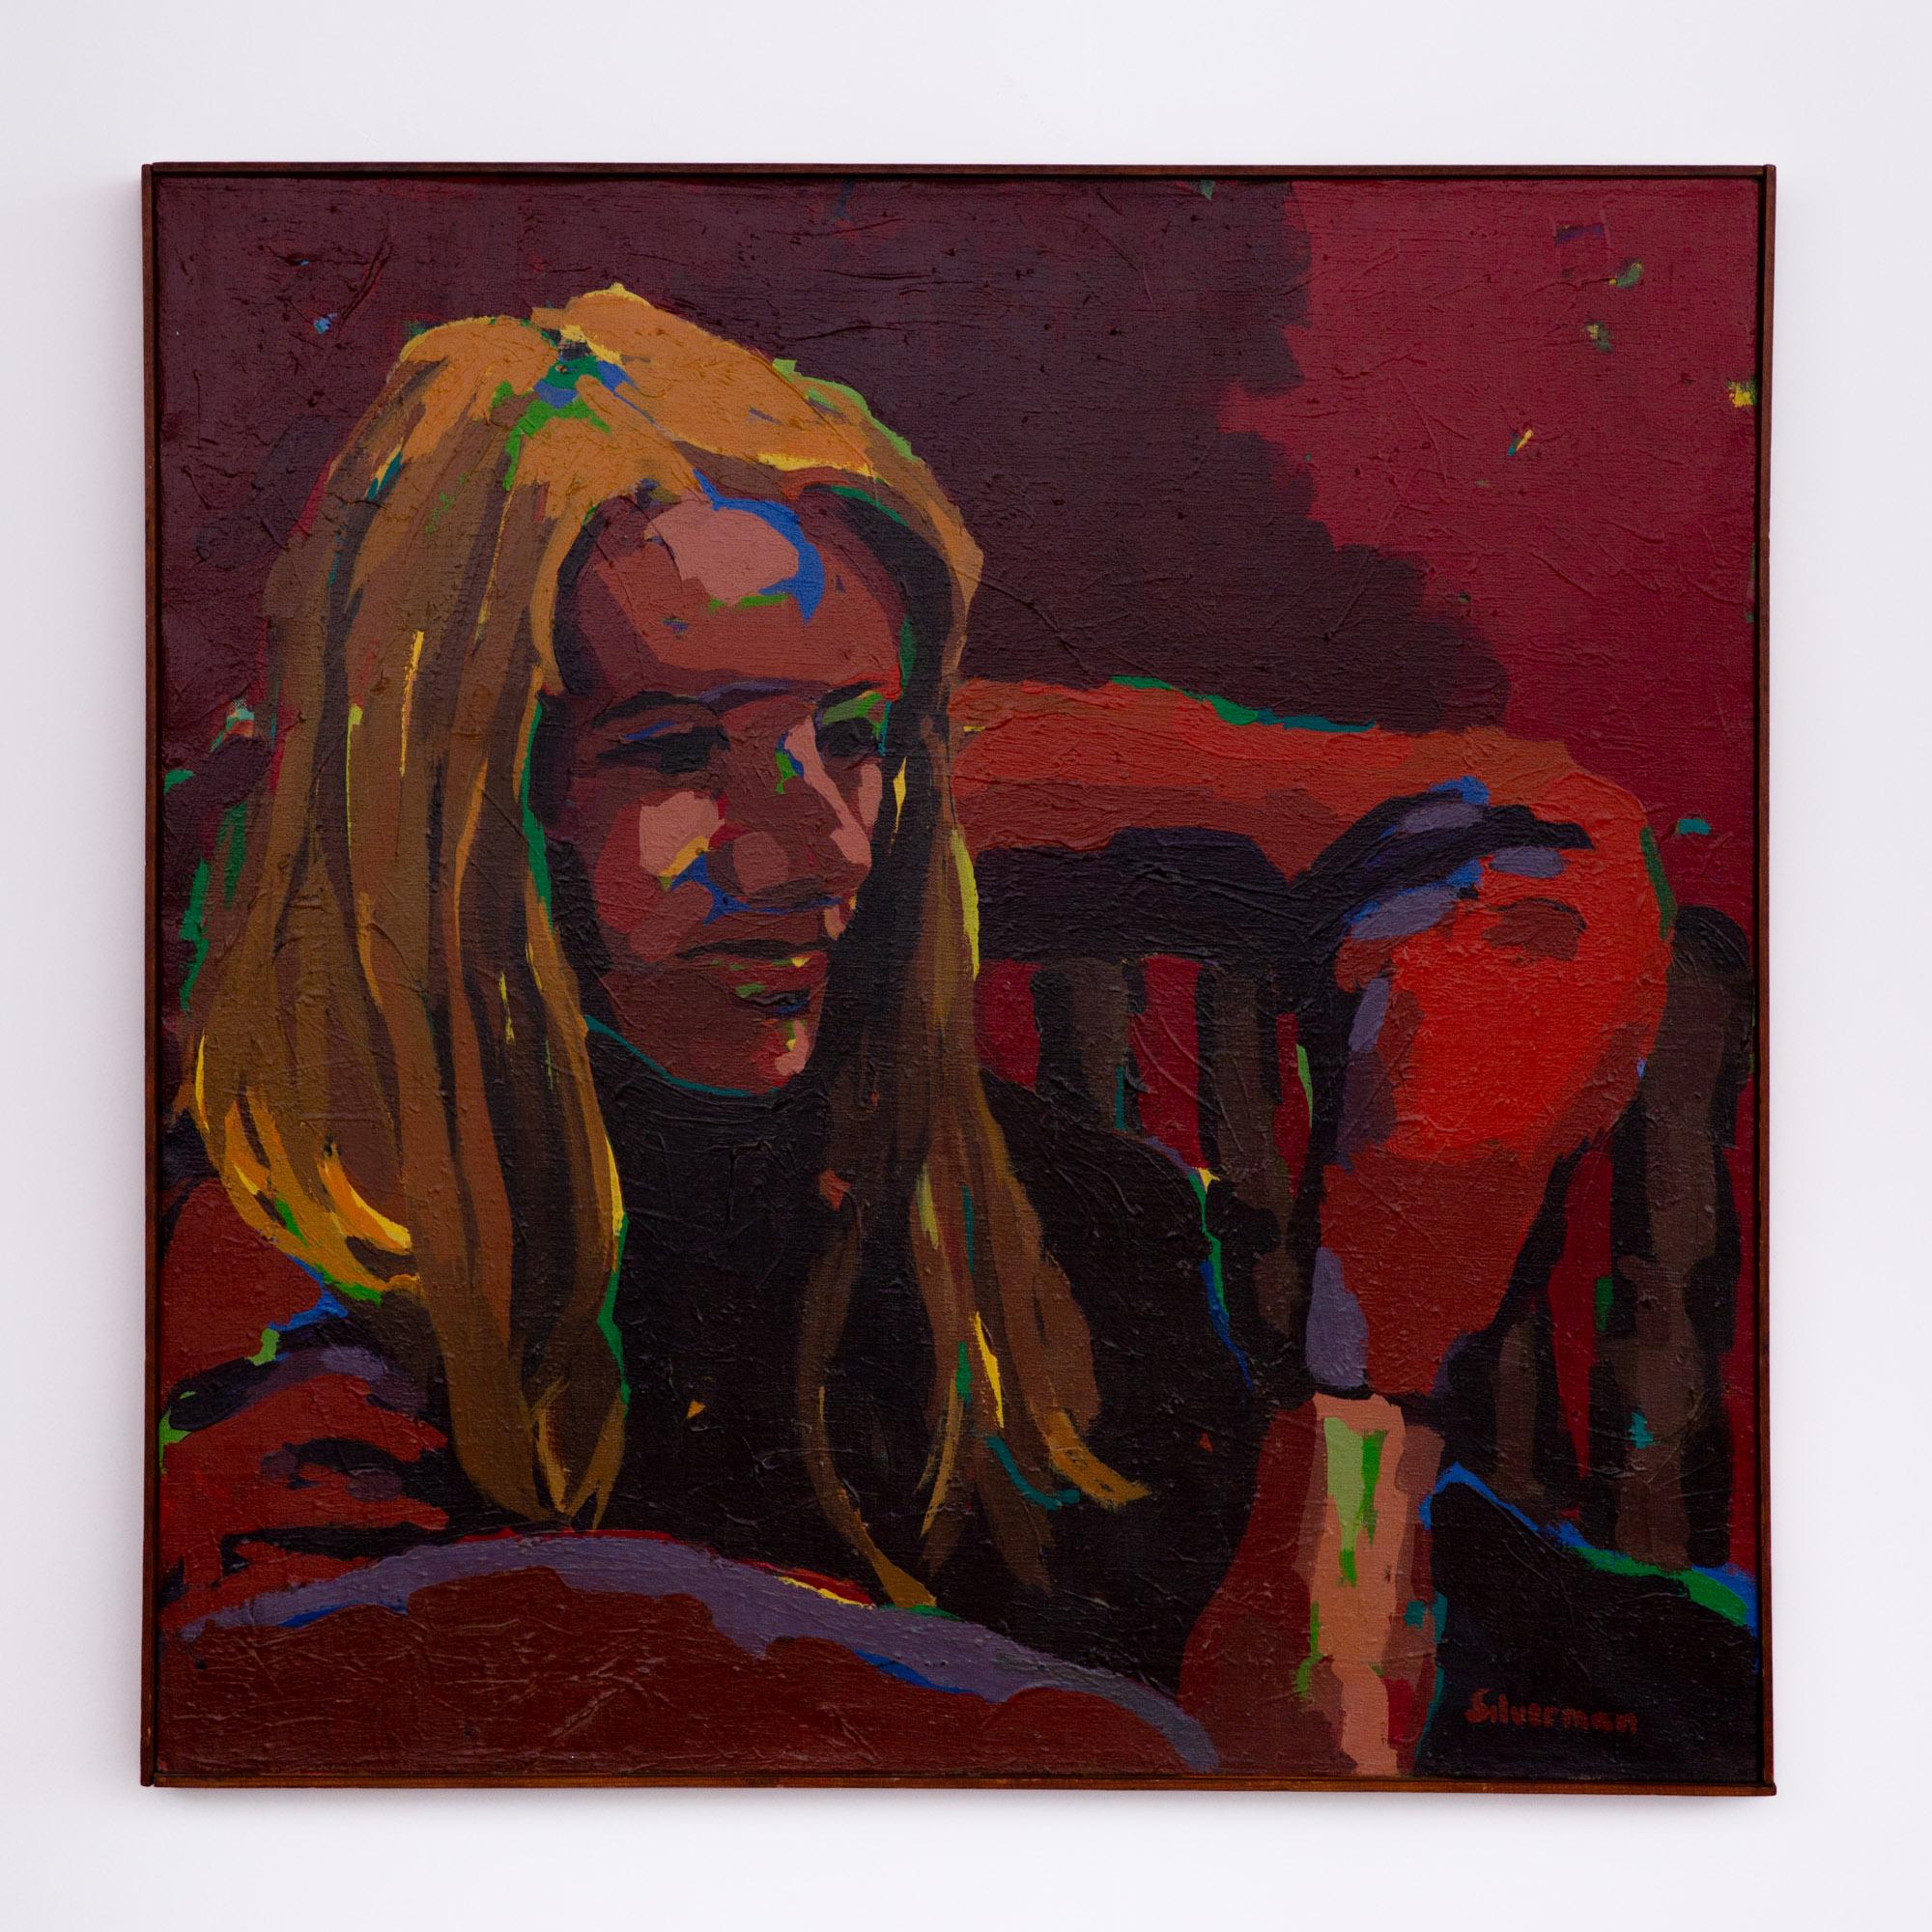 Expressionist portrait of a woman that alludes to the Fauvist movement filled with garnet, scarlet and deep brown color fields. Bright green, yellow and blue accents highlight the areas light interacts with the subject. The woman is shown in a